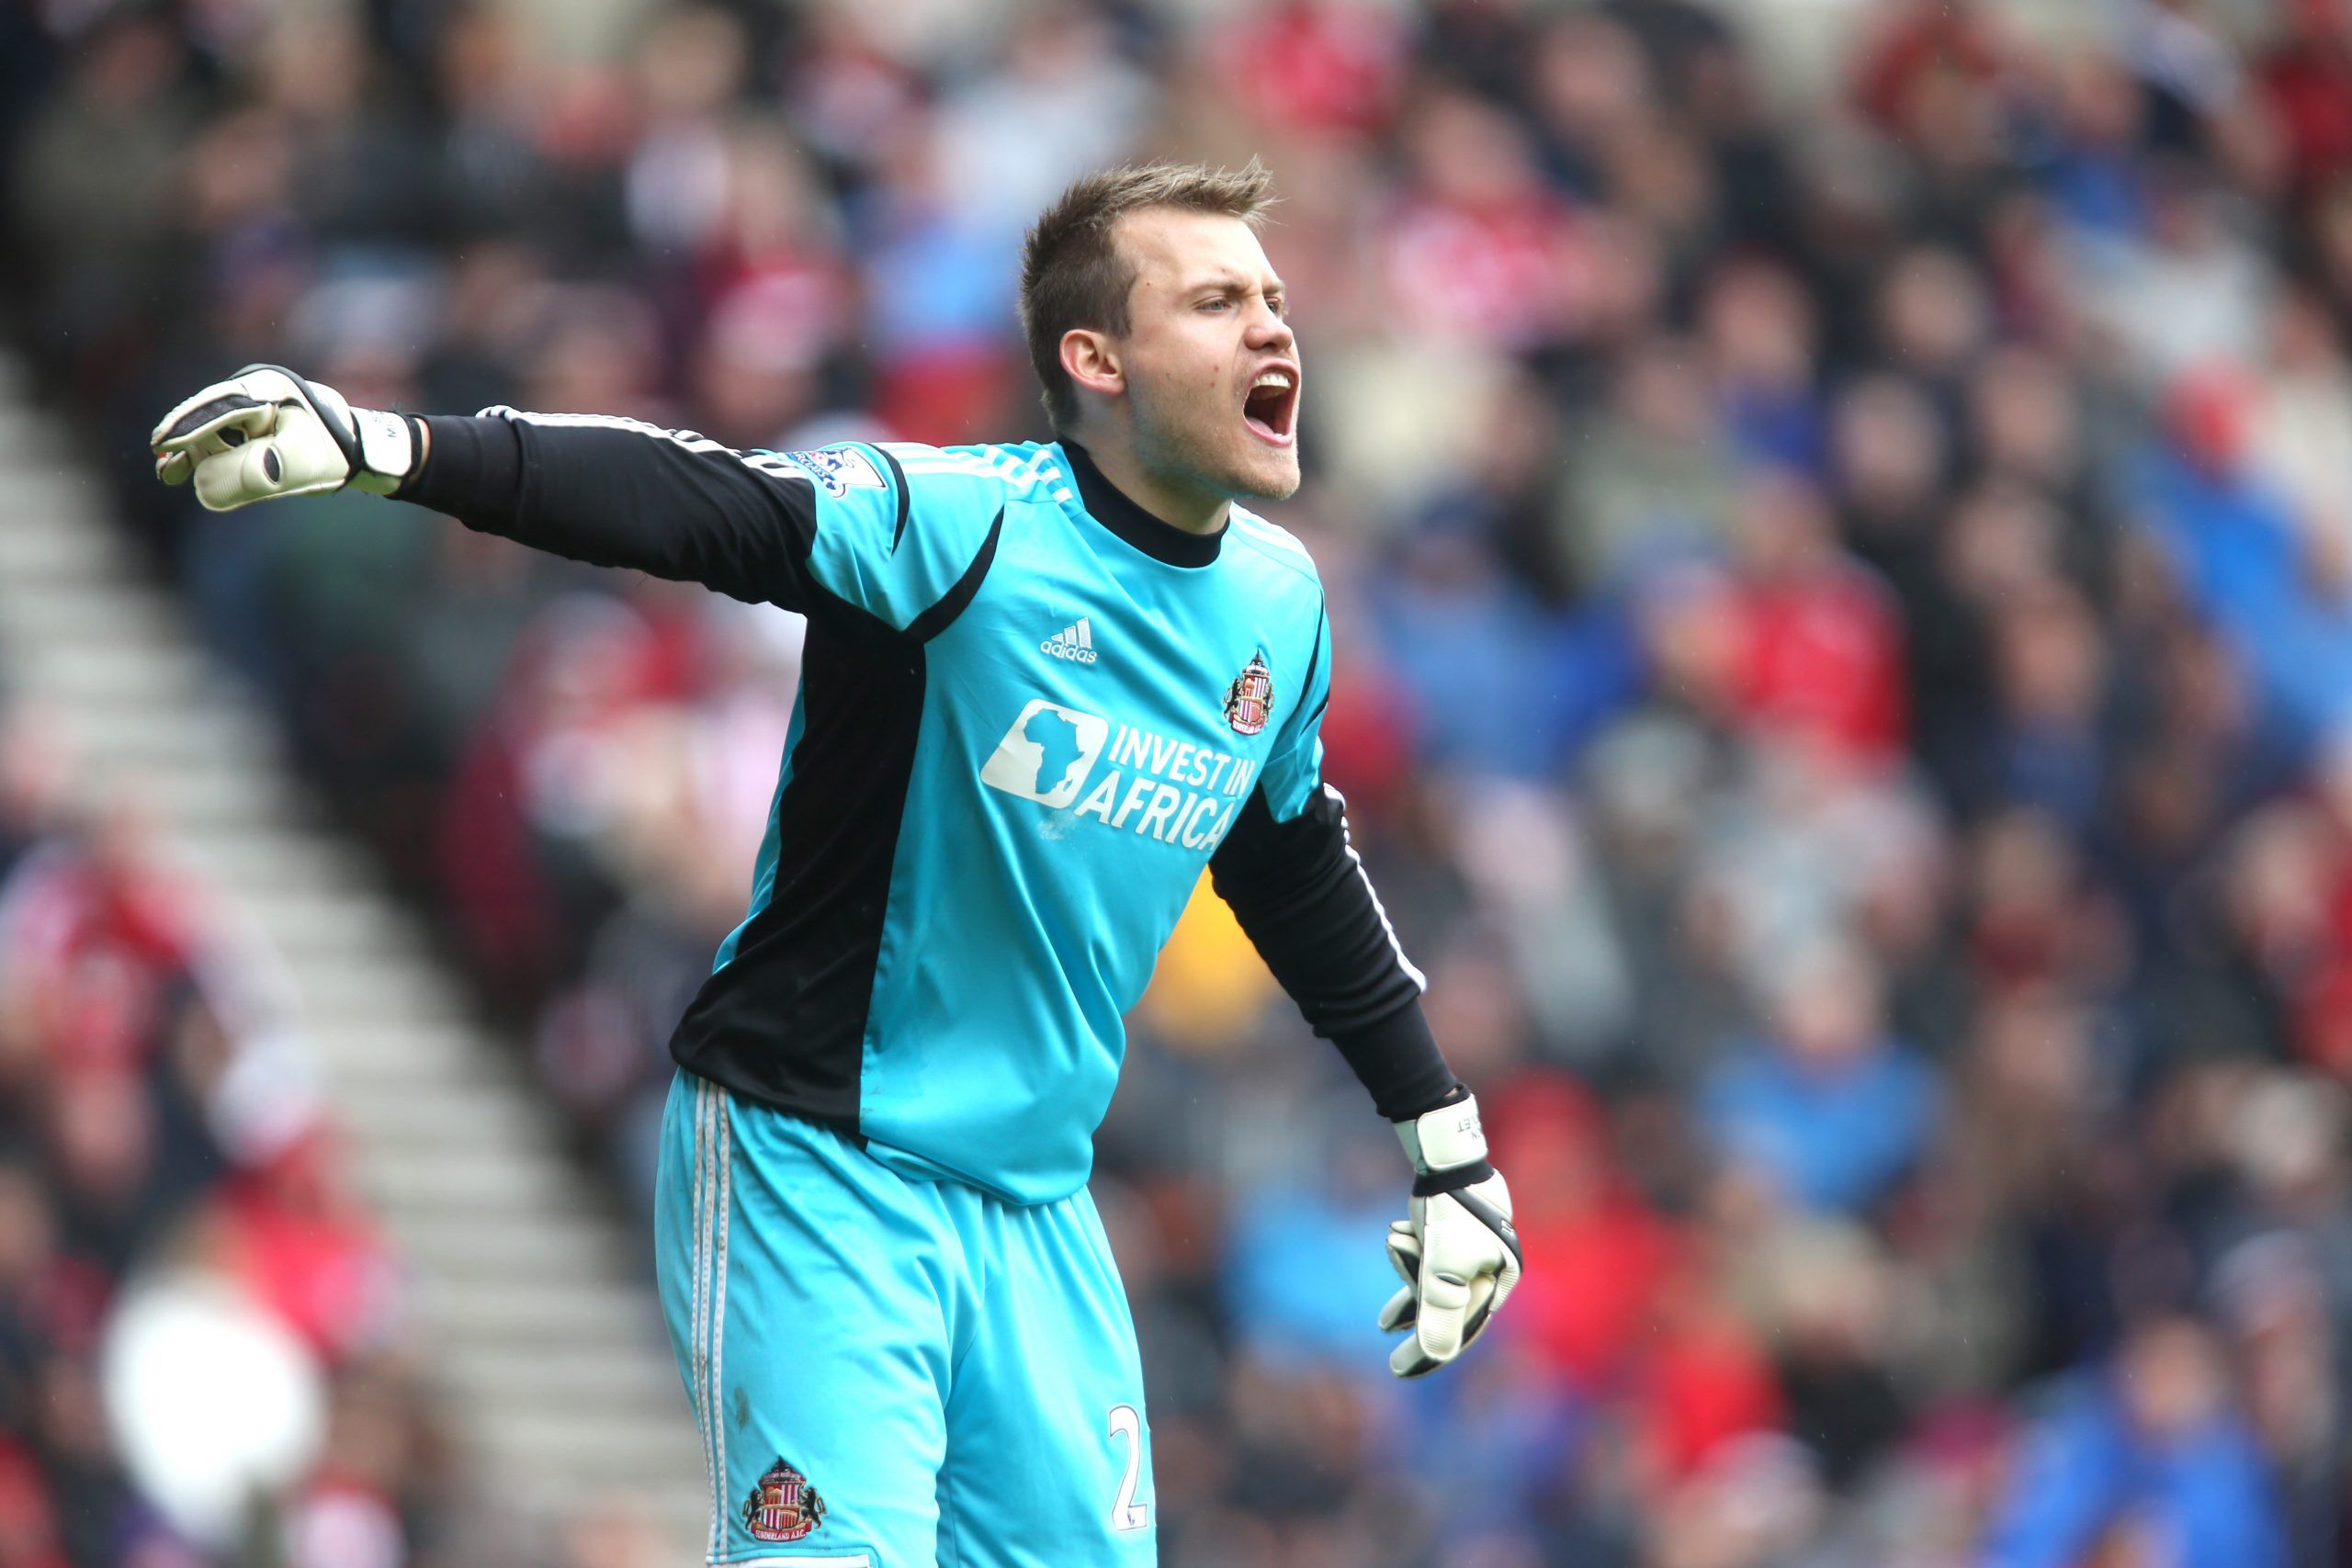 mignolet-sunderland-liverpool-premier-league-bruce-black-catsSimon Mignolet - Sunderland  
Mandatory Credit: Action Images / Lee Smith 
EDITORIAL USE ONLY. No use with unauthorized audio, video, data, fixture lists, club/league logos or live services. Online in-match use limited to 45 images, no video emulation. No use in betting, games or single club/league/player publications.  Please contact your account representative for further details.